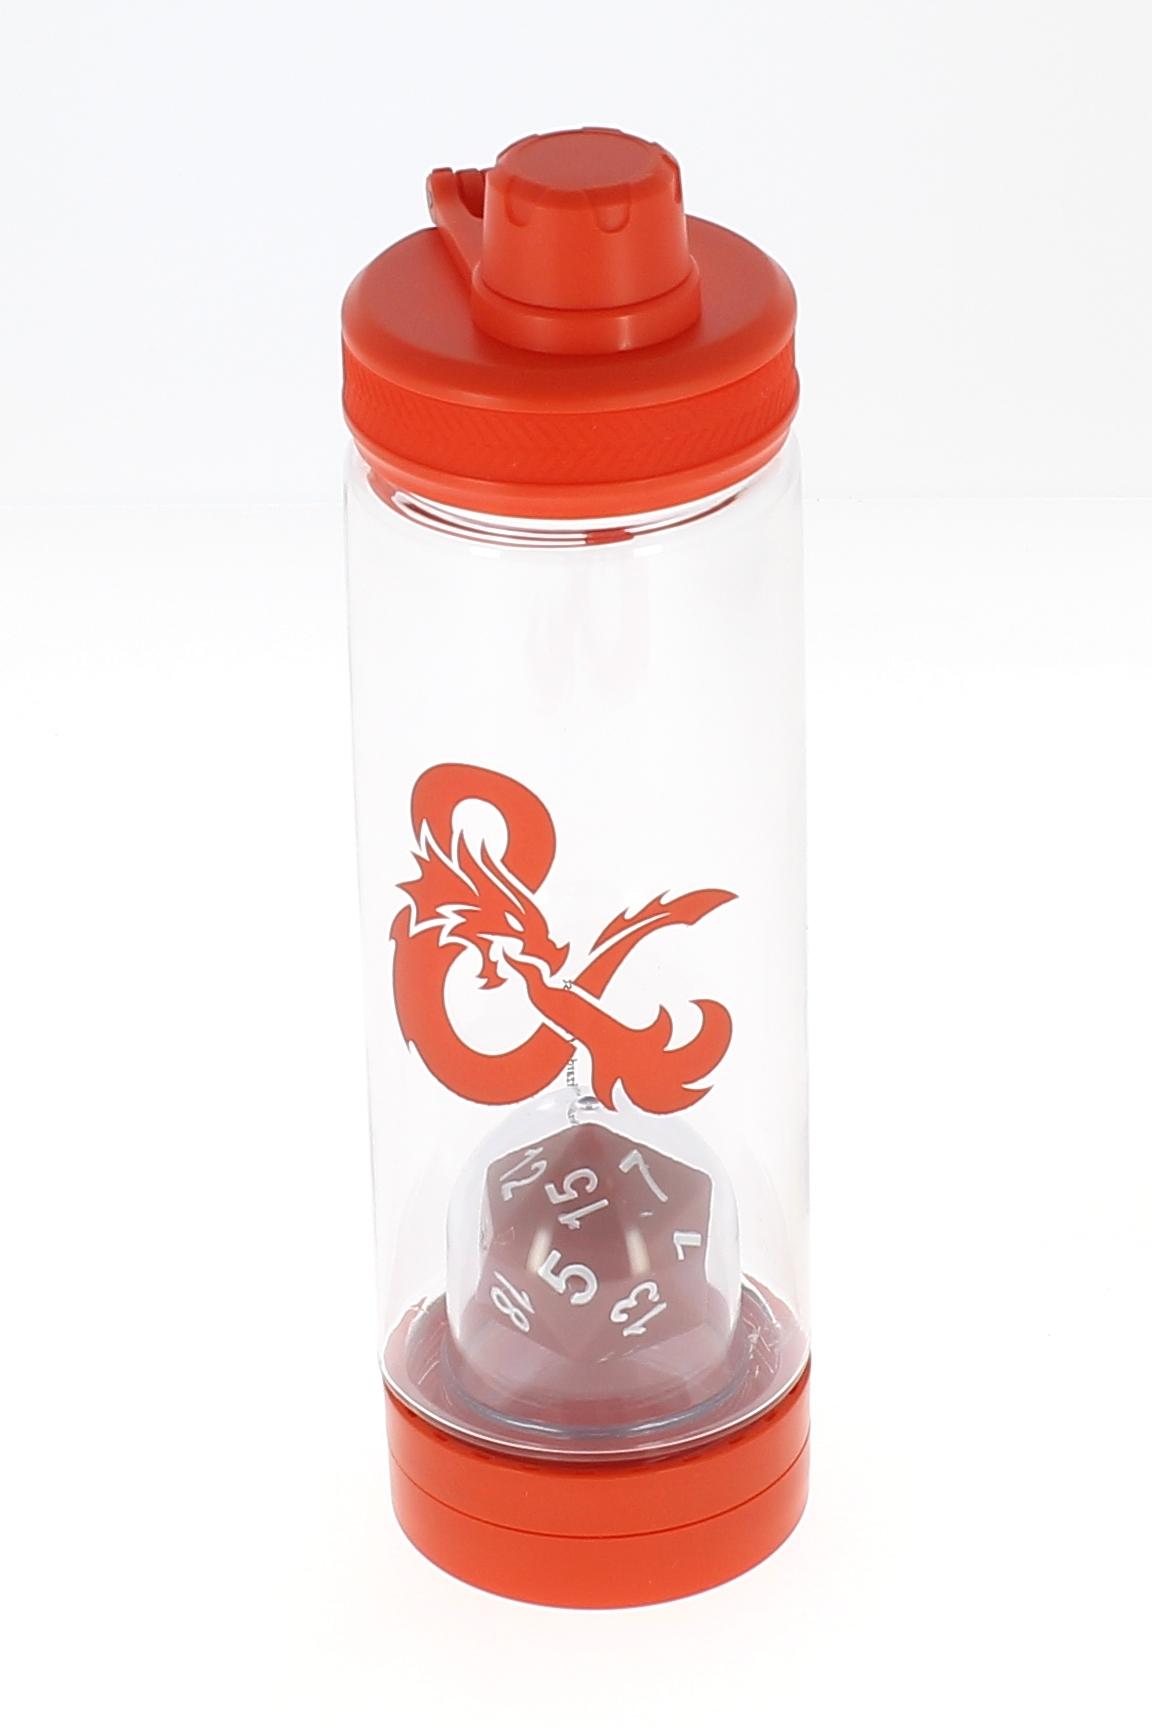 Dungeons & Dragons Water Bottle with Moulded 20 Sided Die Inside